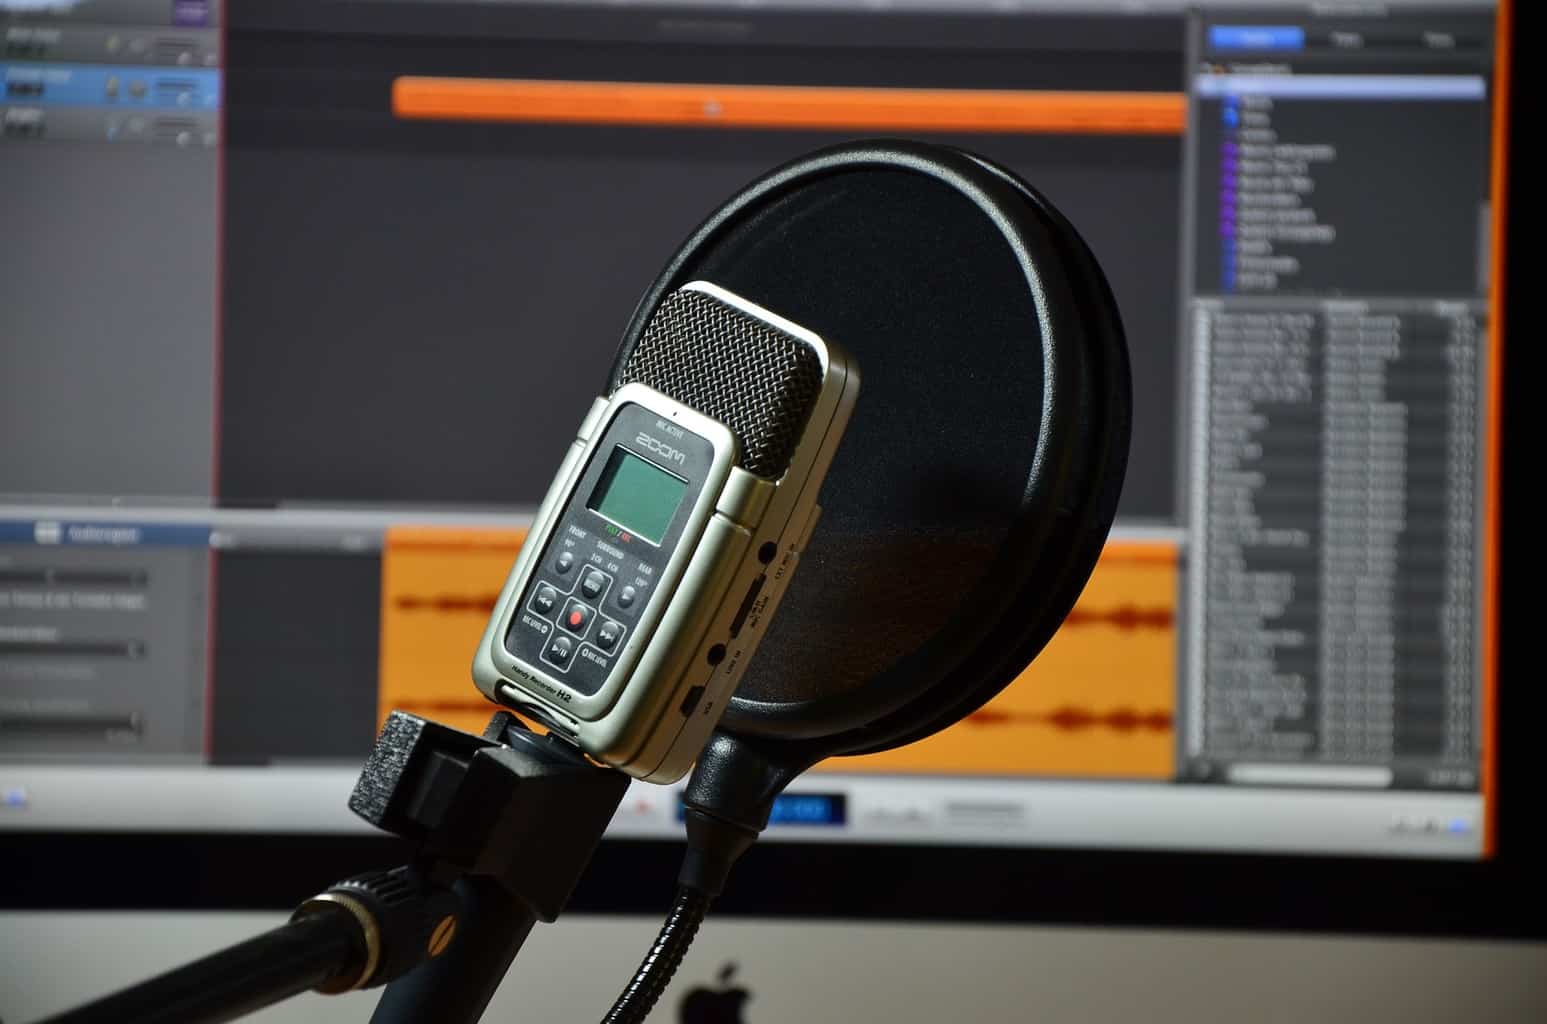 best vocal recording software for windows